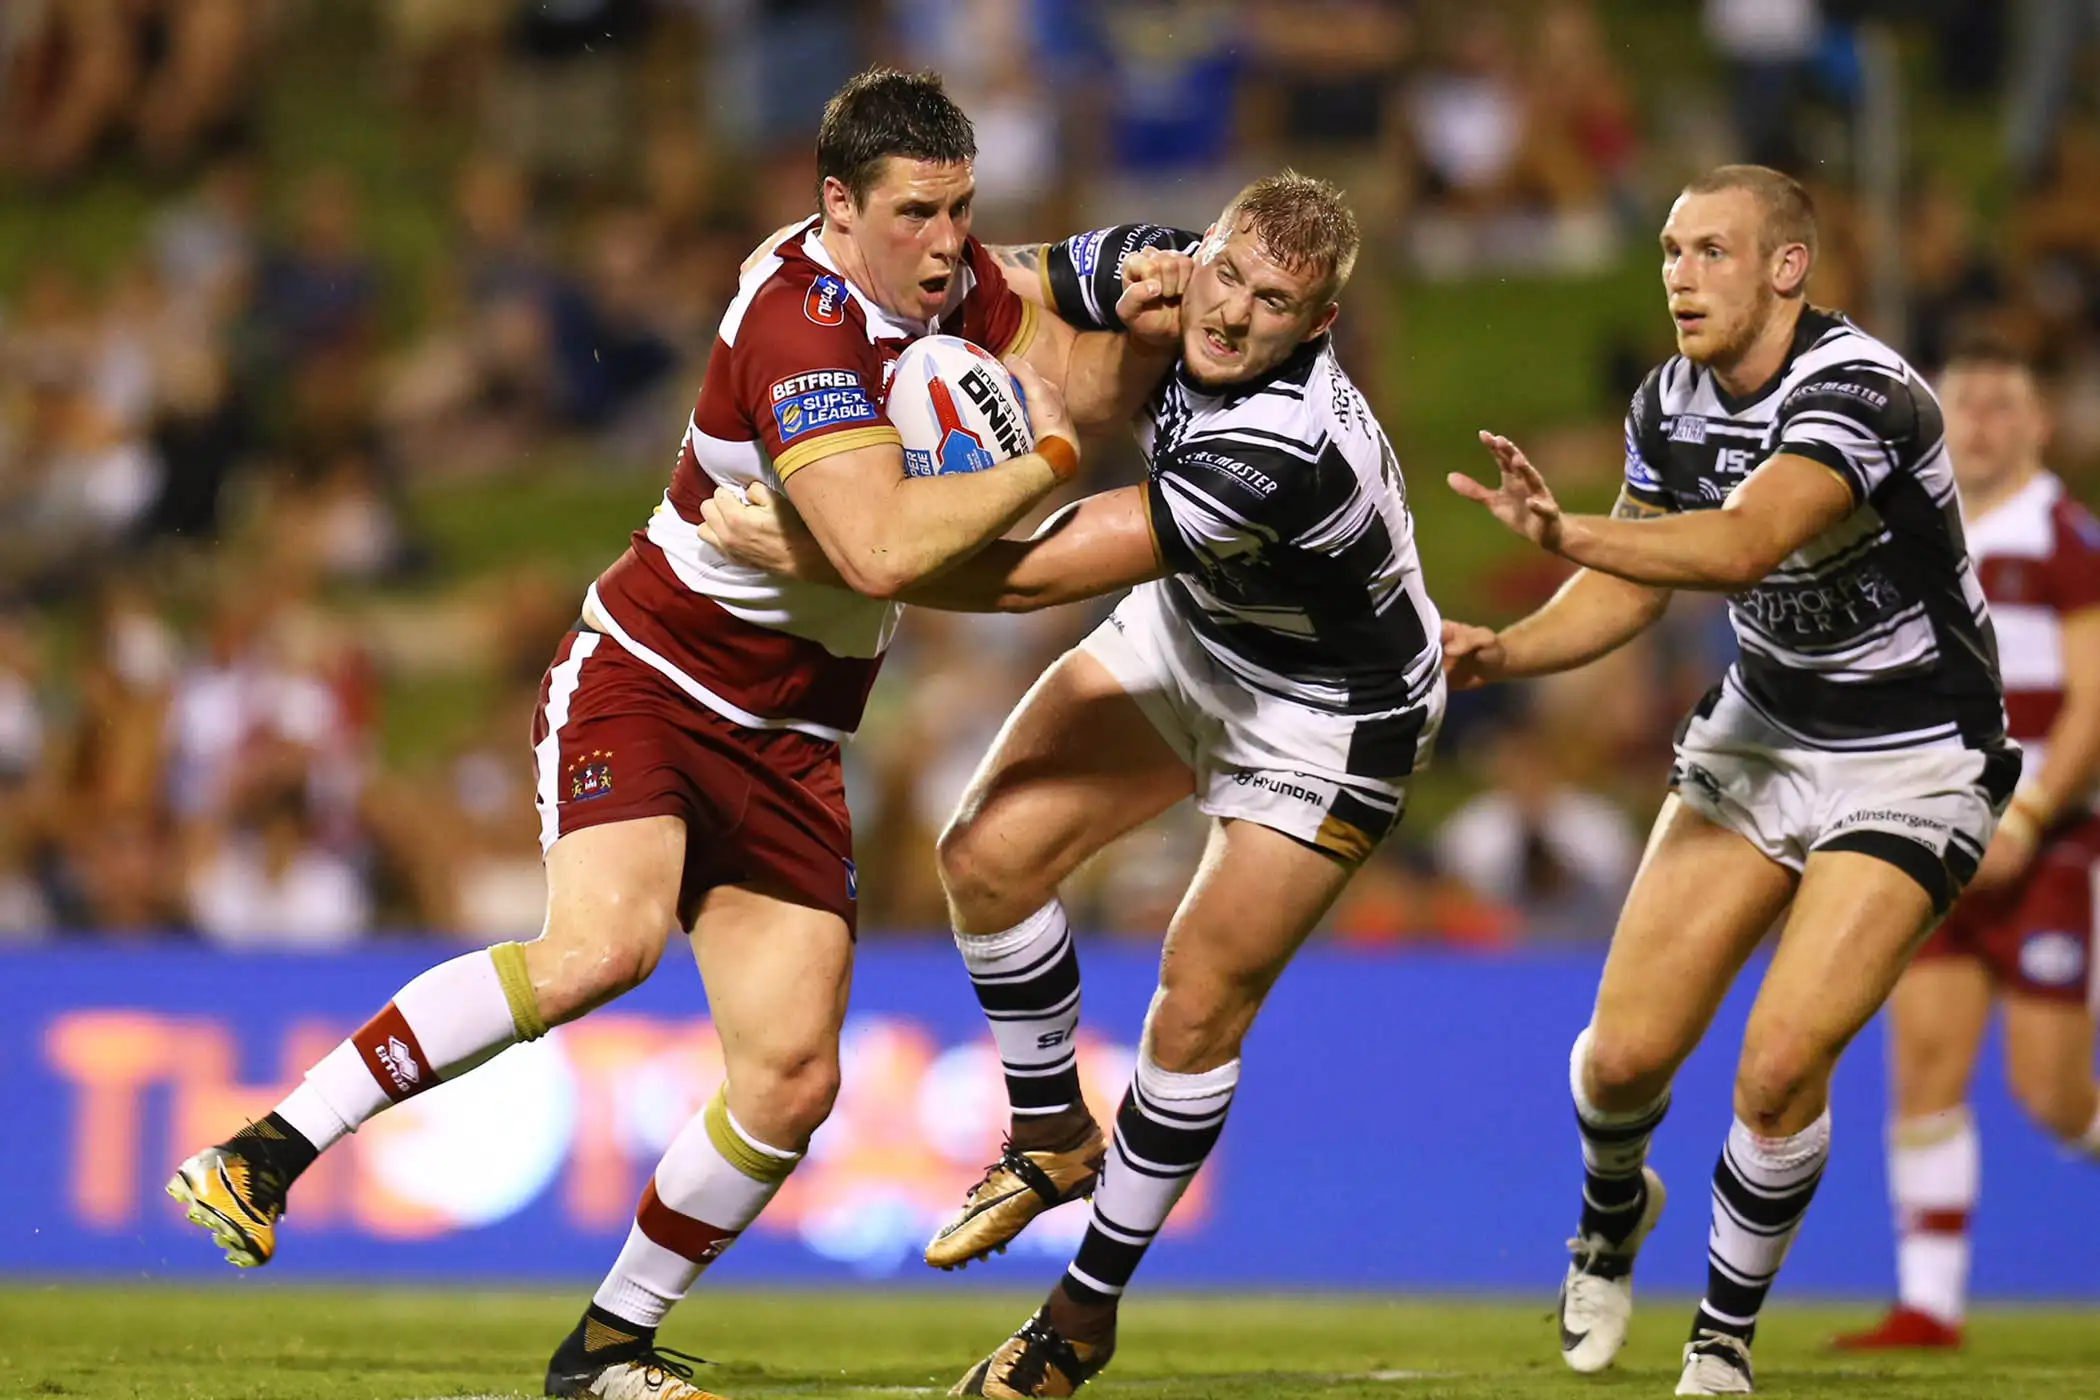 Joel Tomkins returns for Wigan while Oliver Roberts and Jake Mamo ruled out for Huddersfield